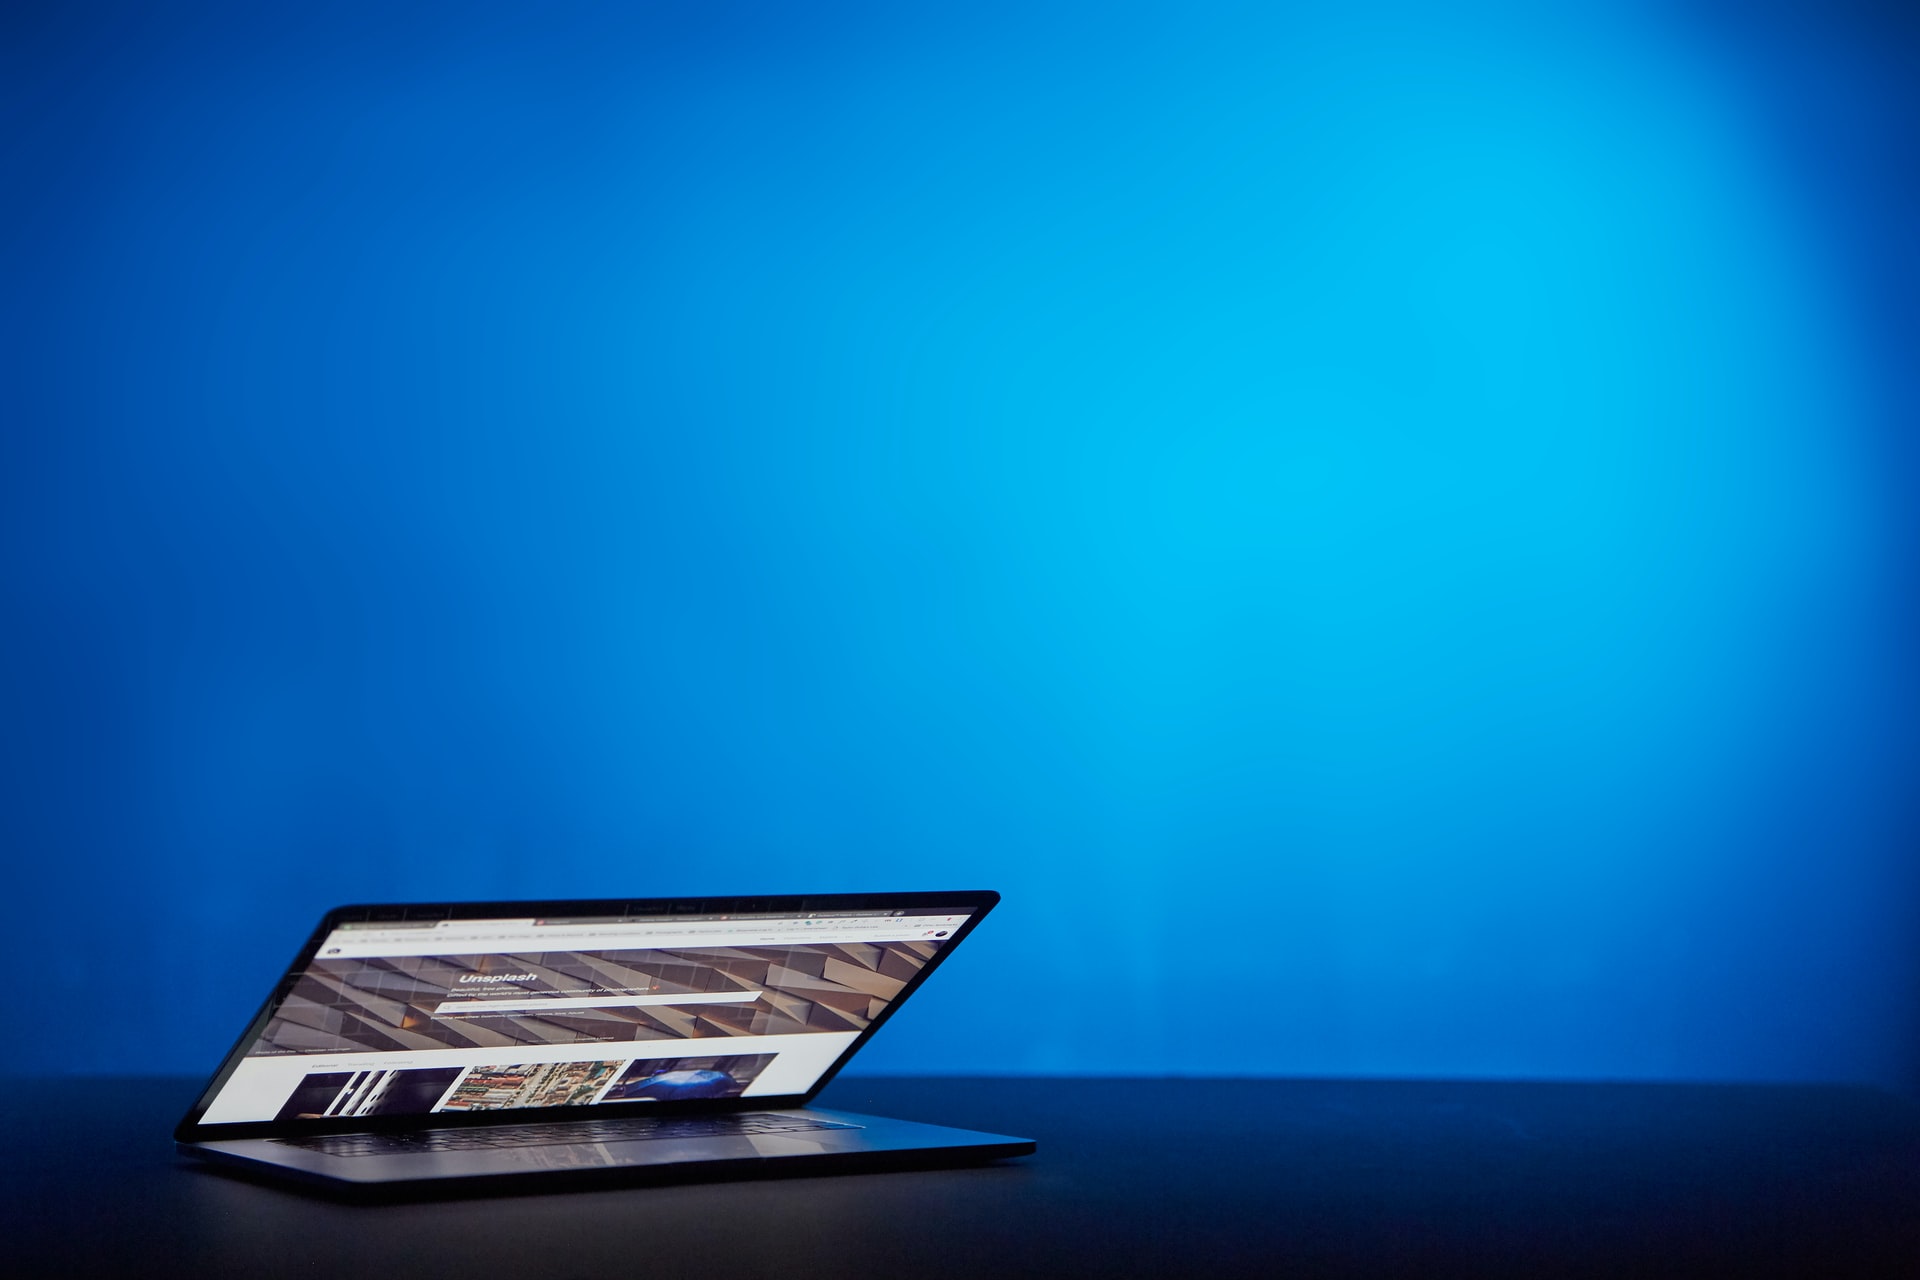 A laptop placed on a blue background